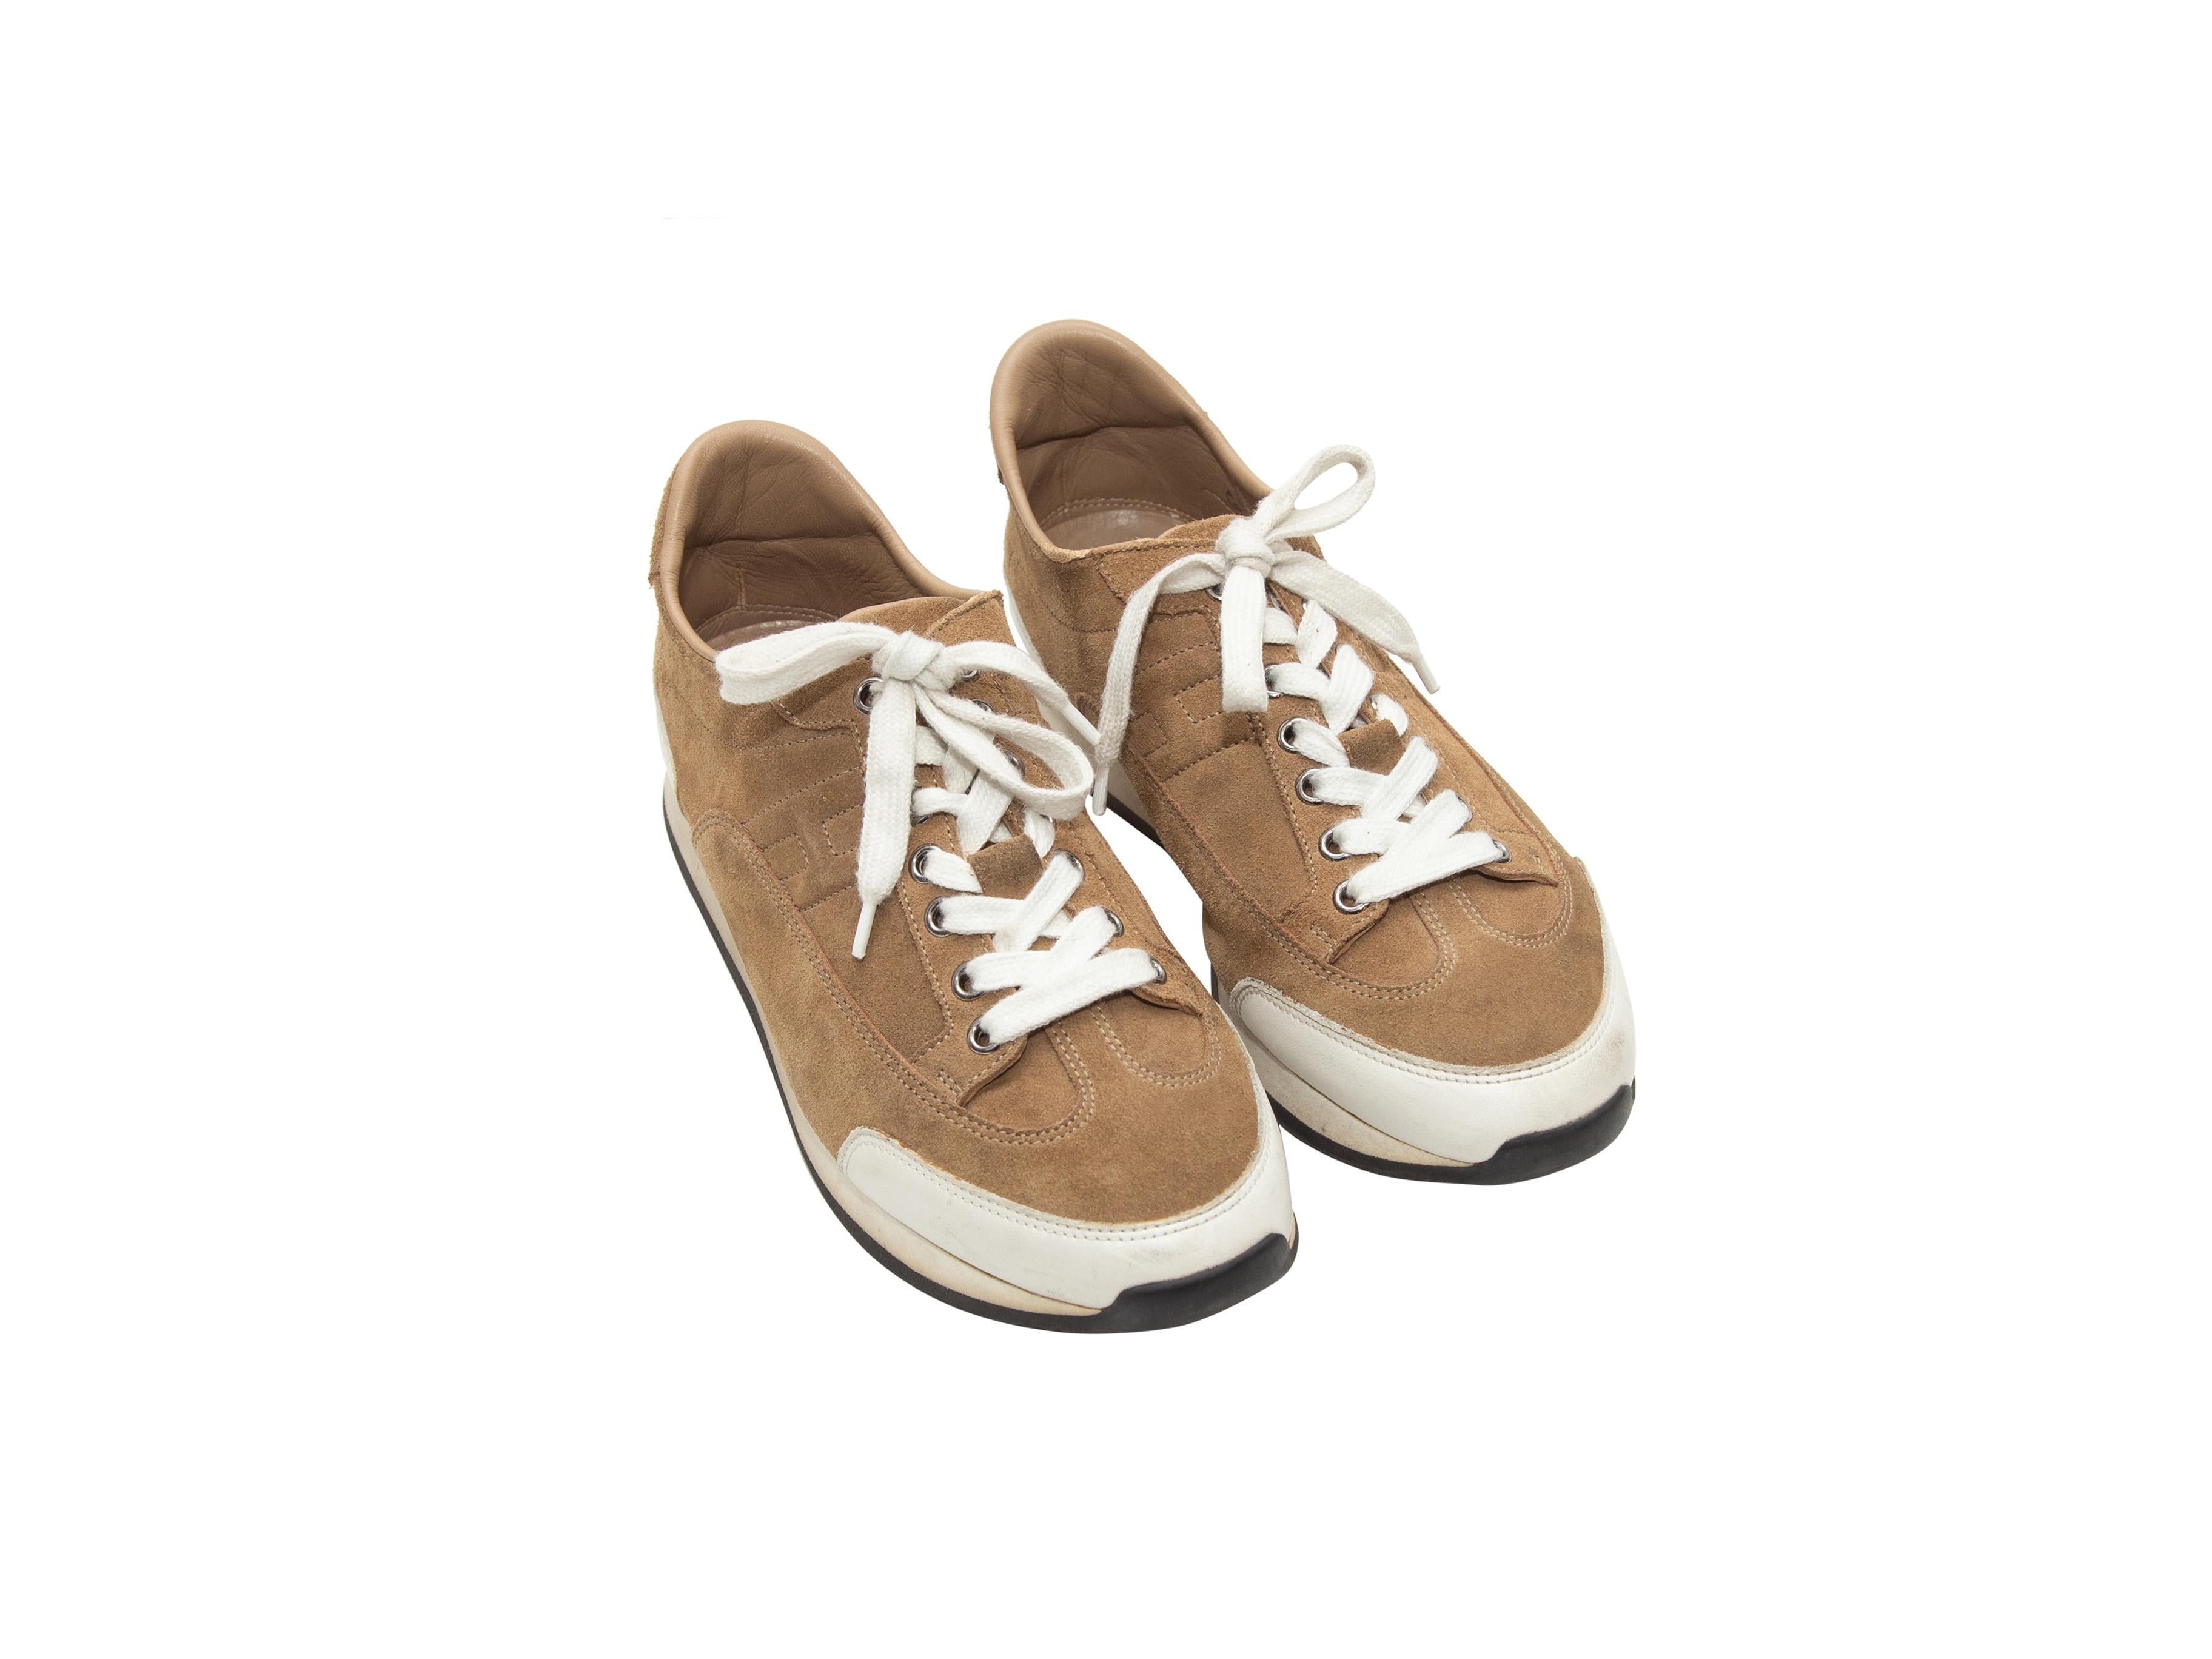 Product details: Brown suede low-top Goal sneakers by Hermes. White trim throughout. Lace-up tie closures at tops. Designer size 38.5. 0.75